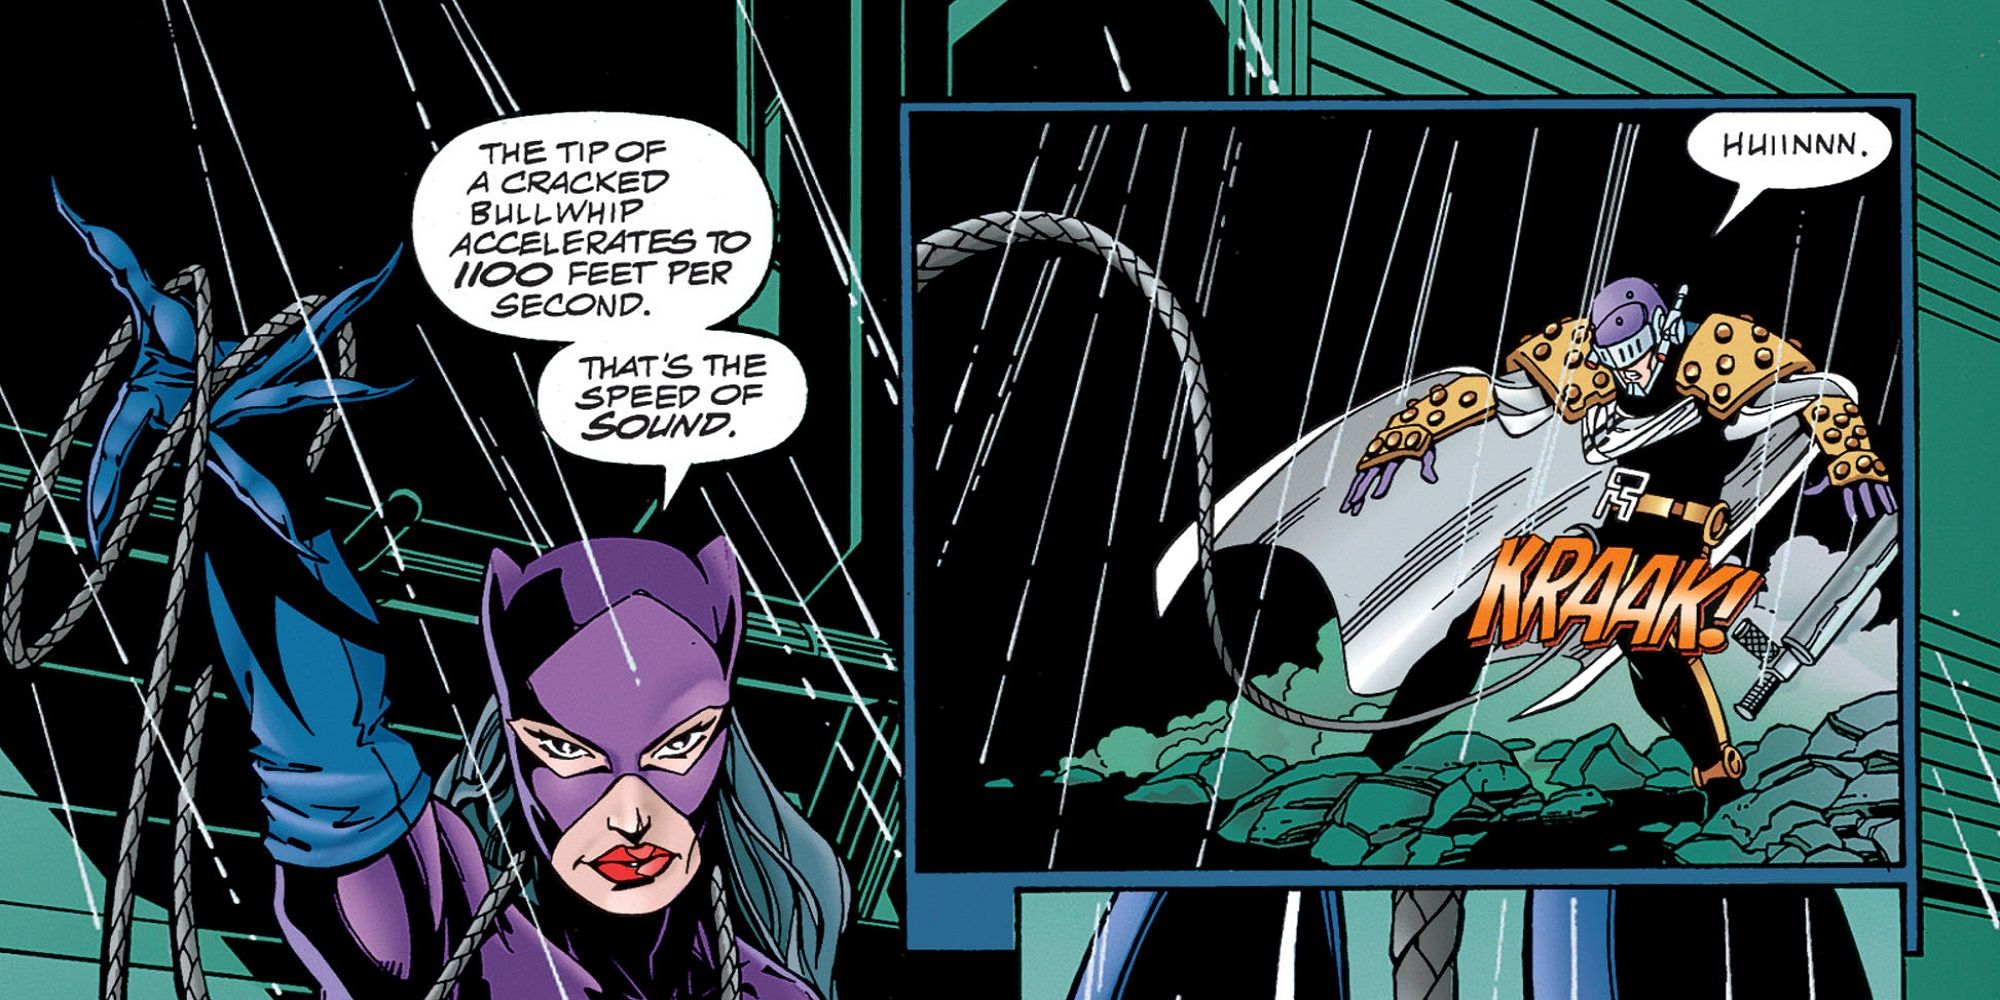 DC's Catwoman hits Prometheus in the crotch with her whip. 